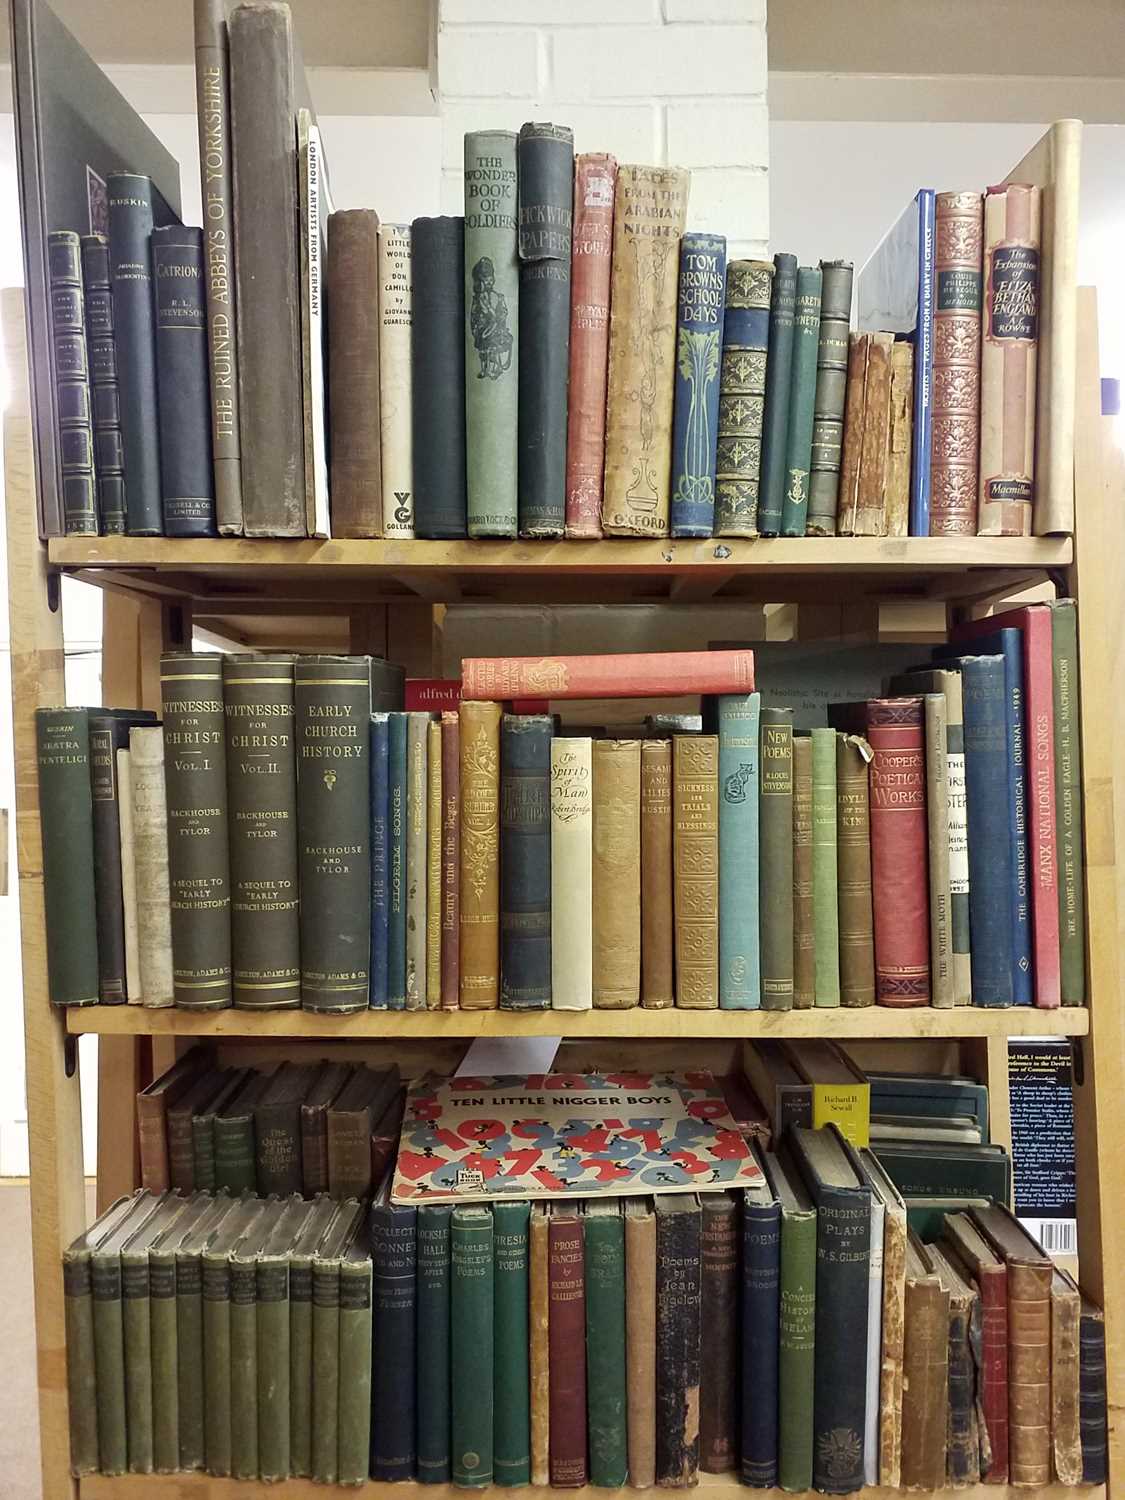 Lot 438 - Literature. A large collection of 19th & 20th century literature & fiction